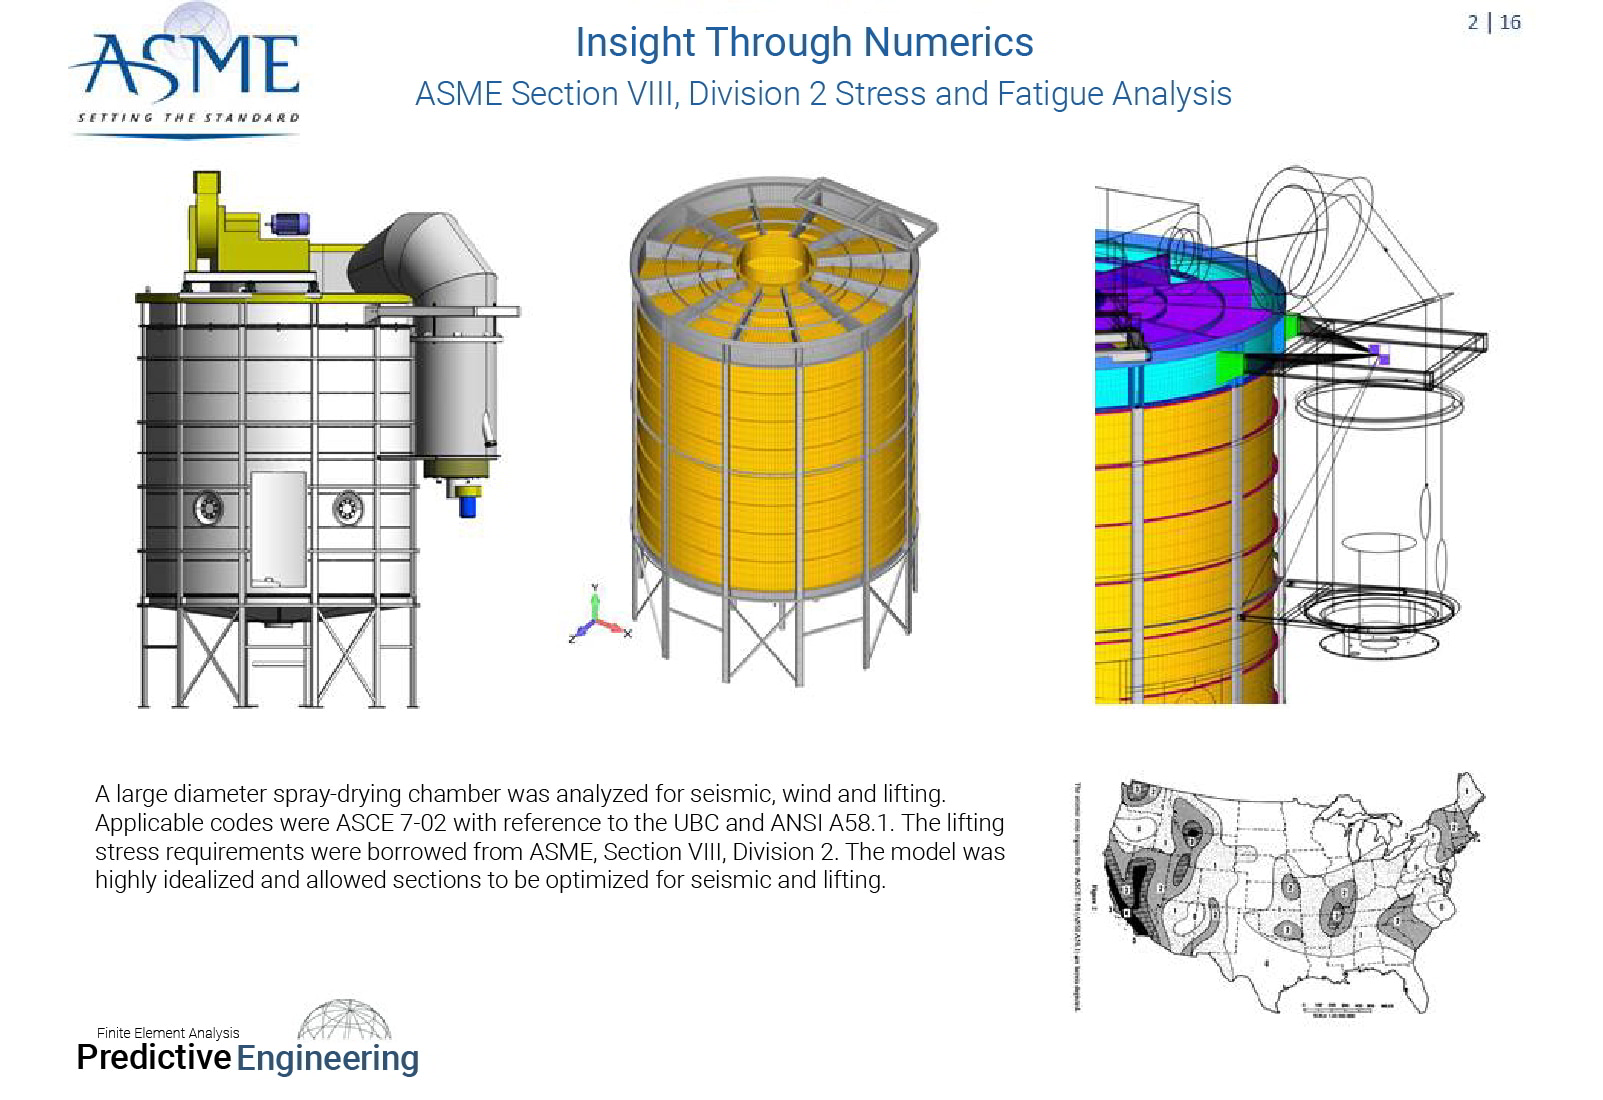 A large diameter spray-drying chamber was analyzed for seismic, wind and lifting - Predictive Engineering ASME BPVC Pressure Vessel Consulting Services